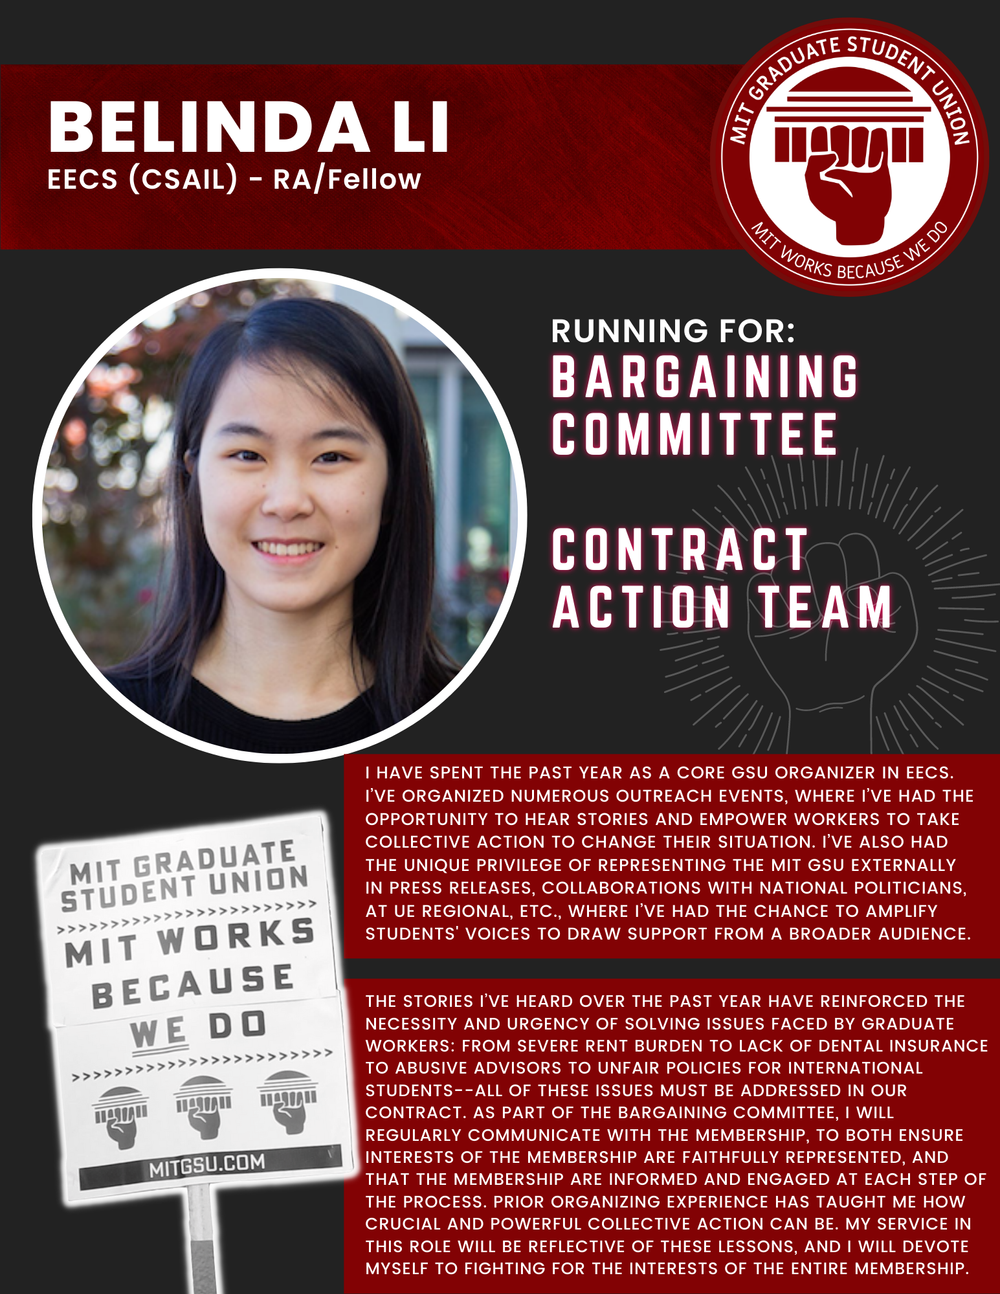  BELINDA LI  EECS (CSAIL) - RA/Fellow   RUNNING FOR: Bargaining Committee  Contract Action Team  I HAVE SPENT THE PAST YEAR AS A CORE GSU ORGANIZER IN EECS.  I’VE ORGANIZED NUMEROUS OUTREACH EVENTS, WHERE I’VE HAD THE OPPORTUNITY TO HEAR STORIES AND 